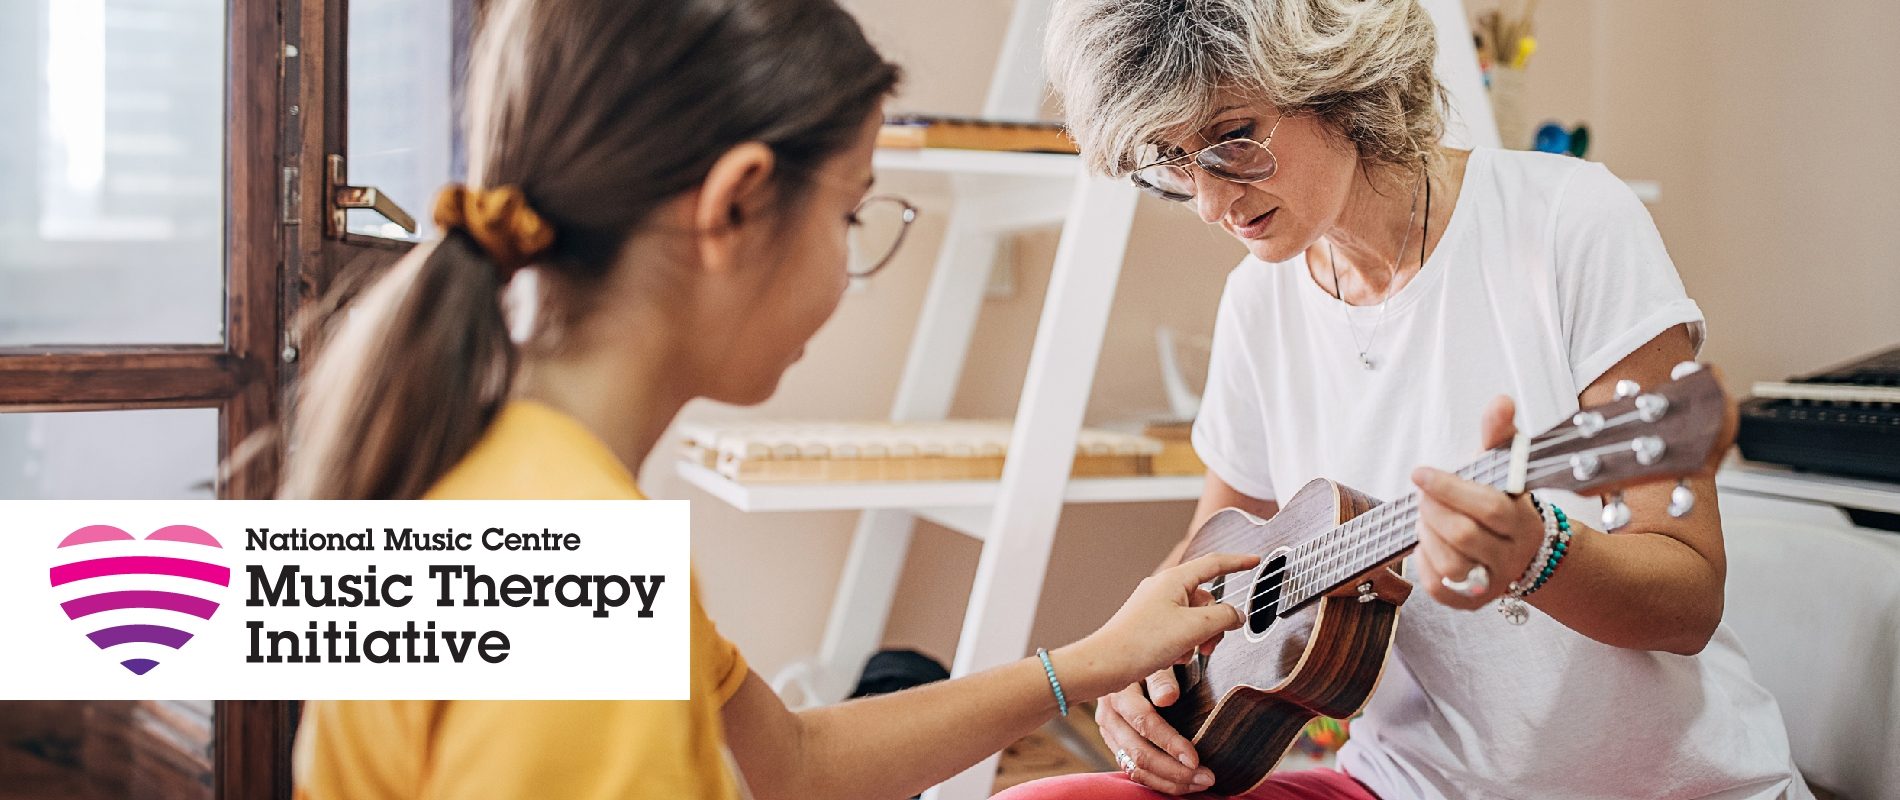 National Music Centre Expands Music Therapy Initiative to Transform Lives Across the Prairies